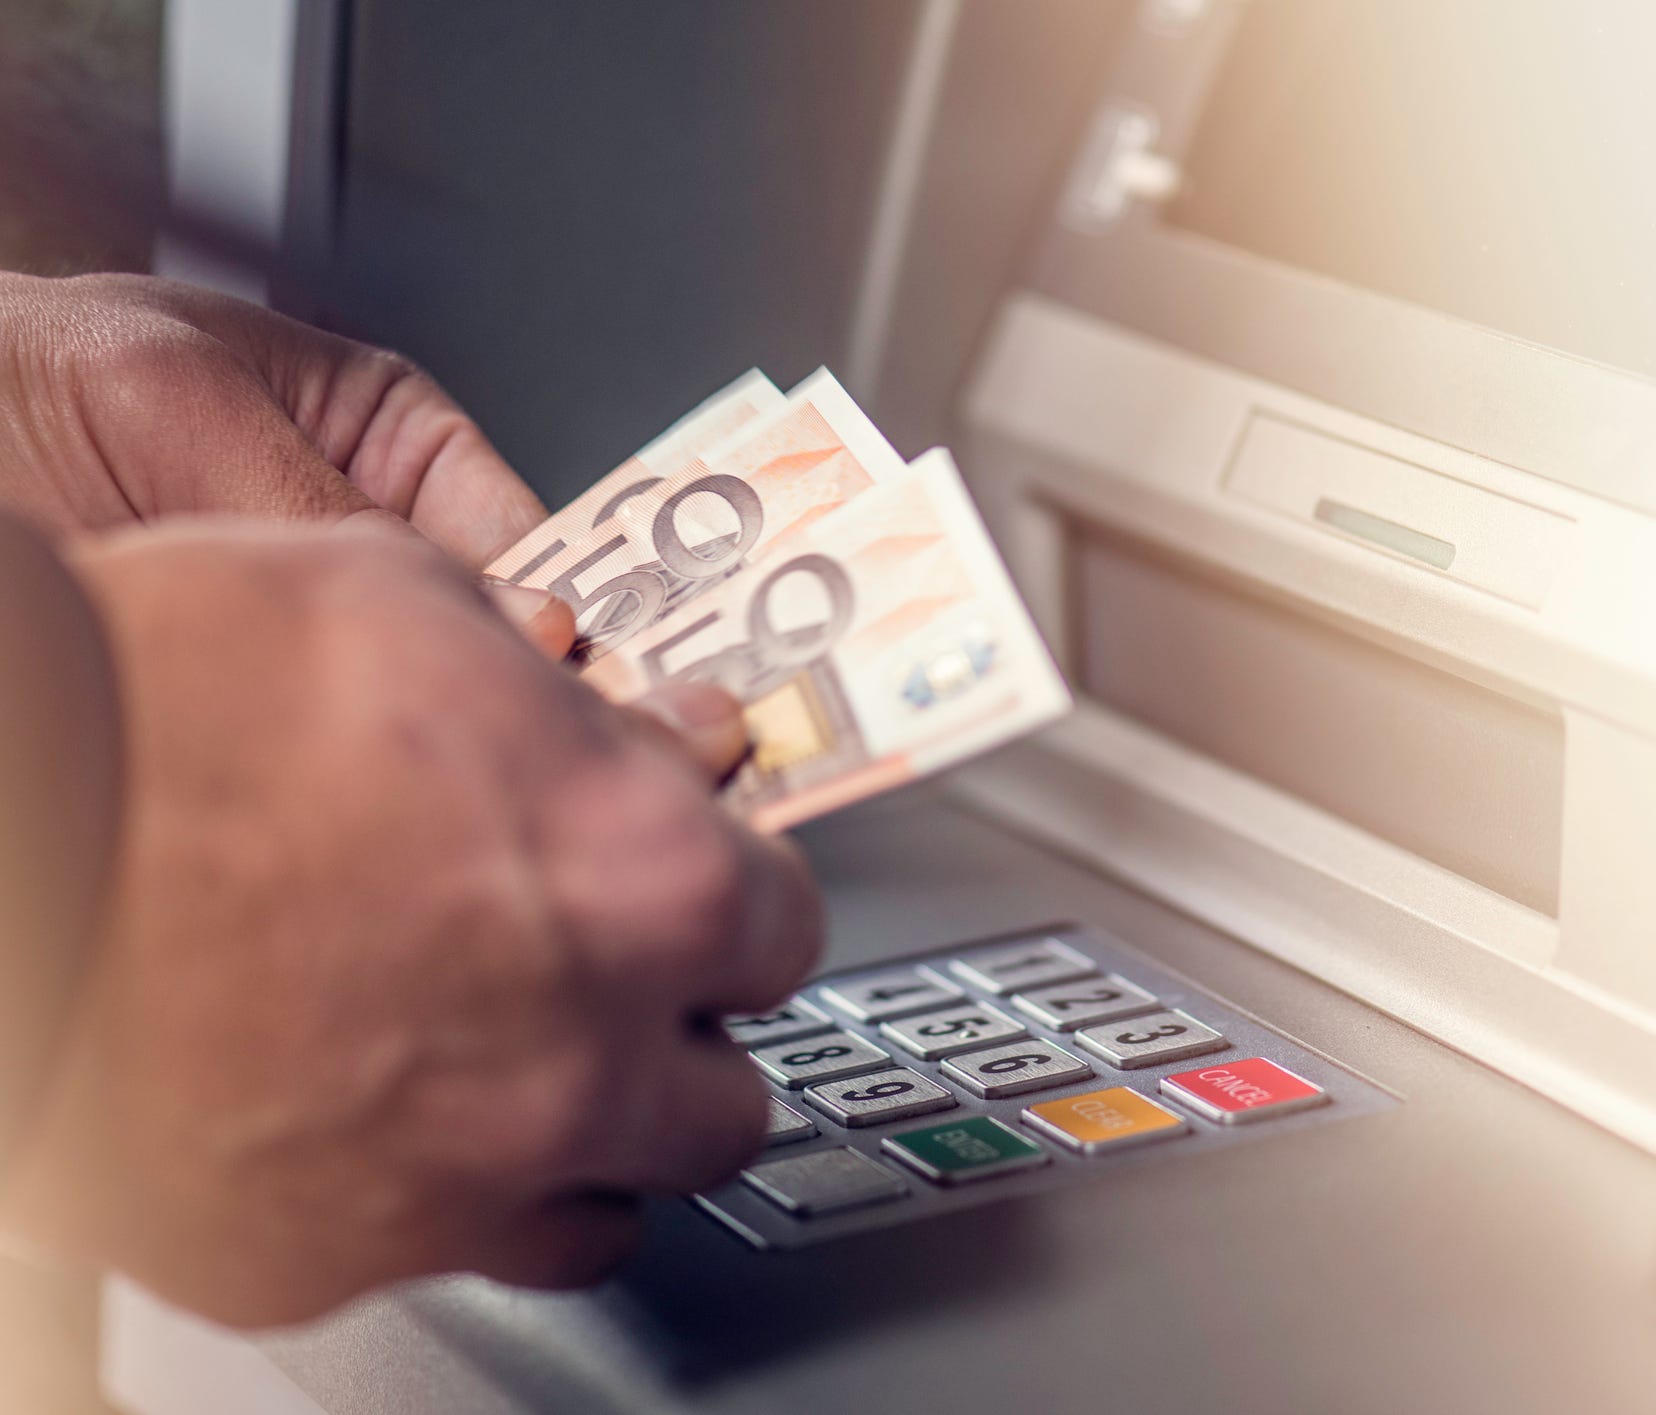 If you need currency, use a debit card at an ATM operated by a known bank—preferably an ATM inside the bank's office, to avoid the possibility of encountering a skimmer.